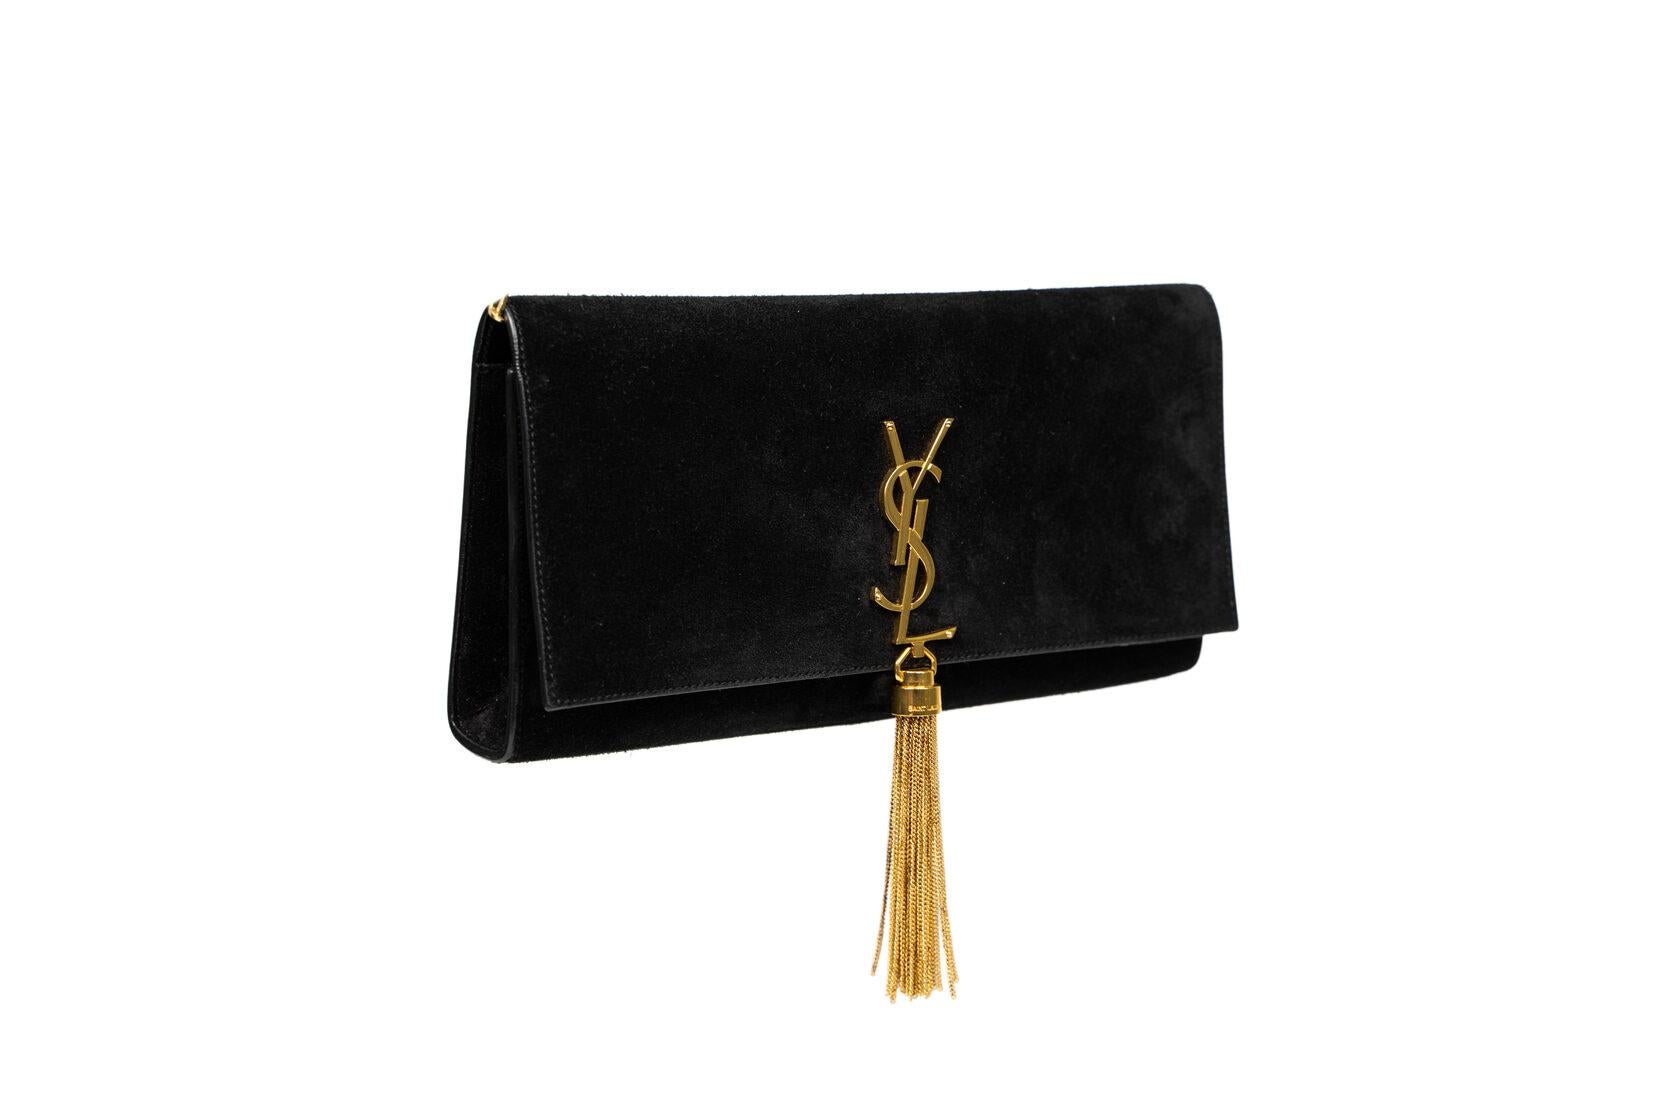 CONDITION: A: Excellent condition with few signs of use; carefully kept.
PACKAGE: Entrupy Certificate
DUSTBAG: Yes
BOX: Yes
SIZE: 27/14/3 cm
BRAND: SAINT LAURENT
MODEL: Pompom Kate Clutch
Black color
MATERIAL: Suede
INSIDE COLOR: Black
INSIDE